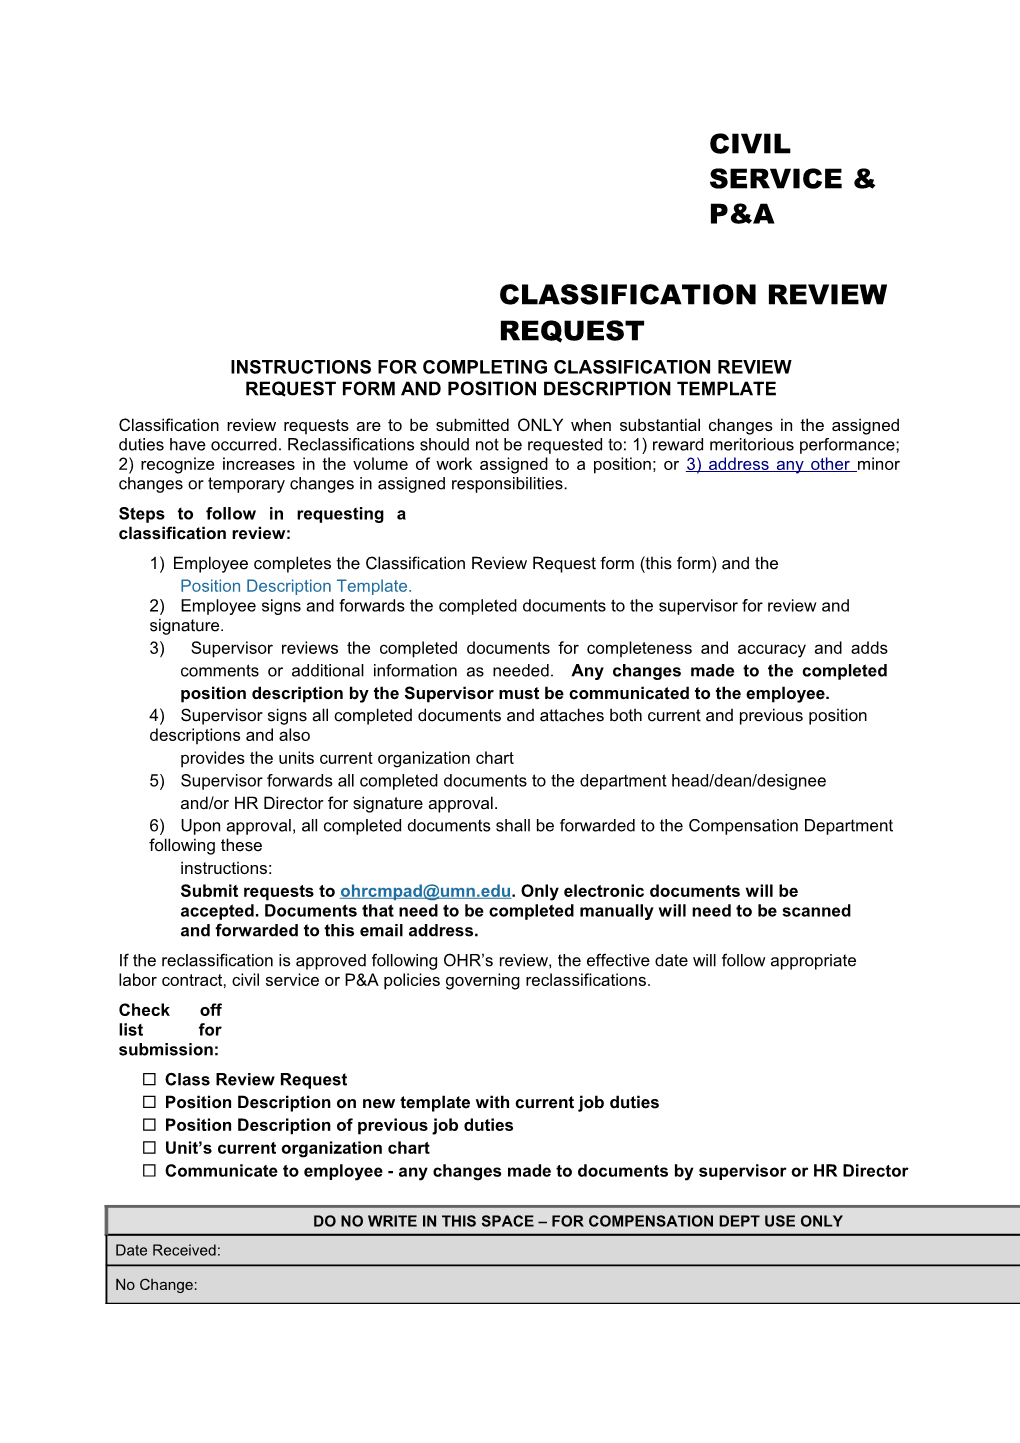 Instructions for Completing Classification Review Request Form and Position Description